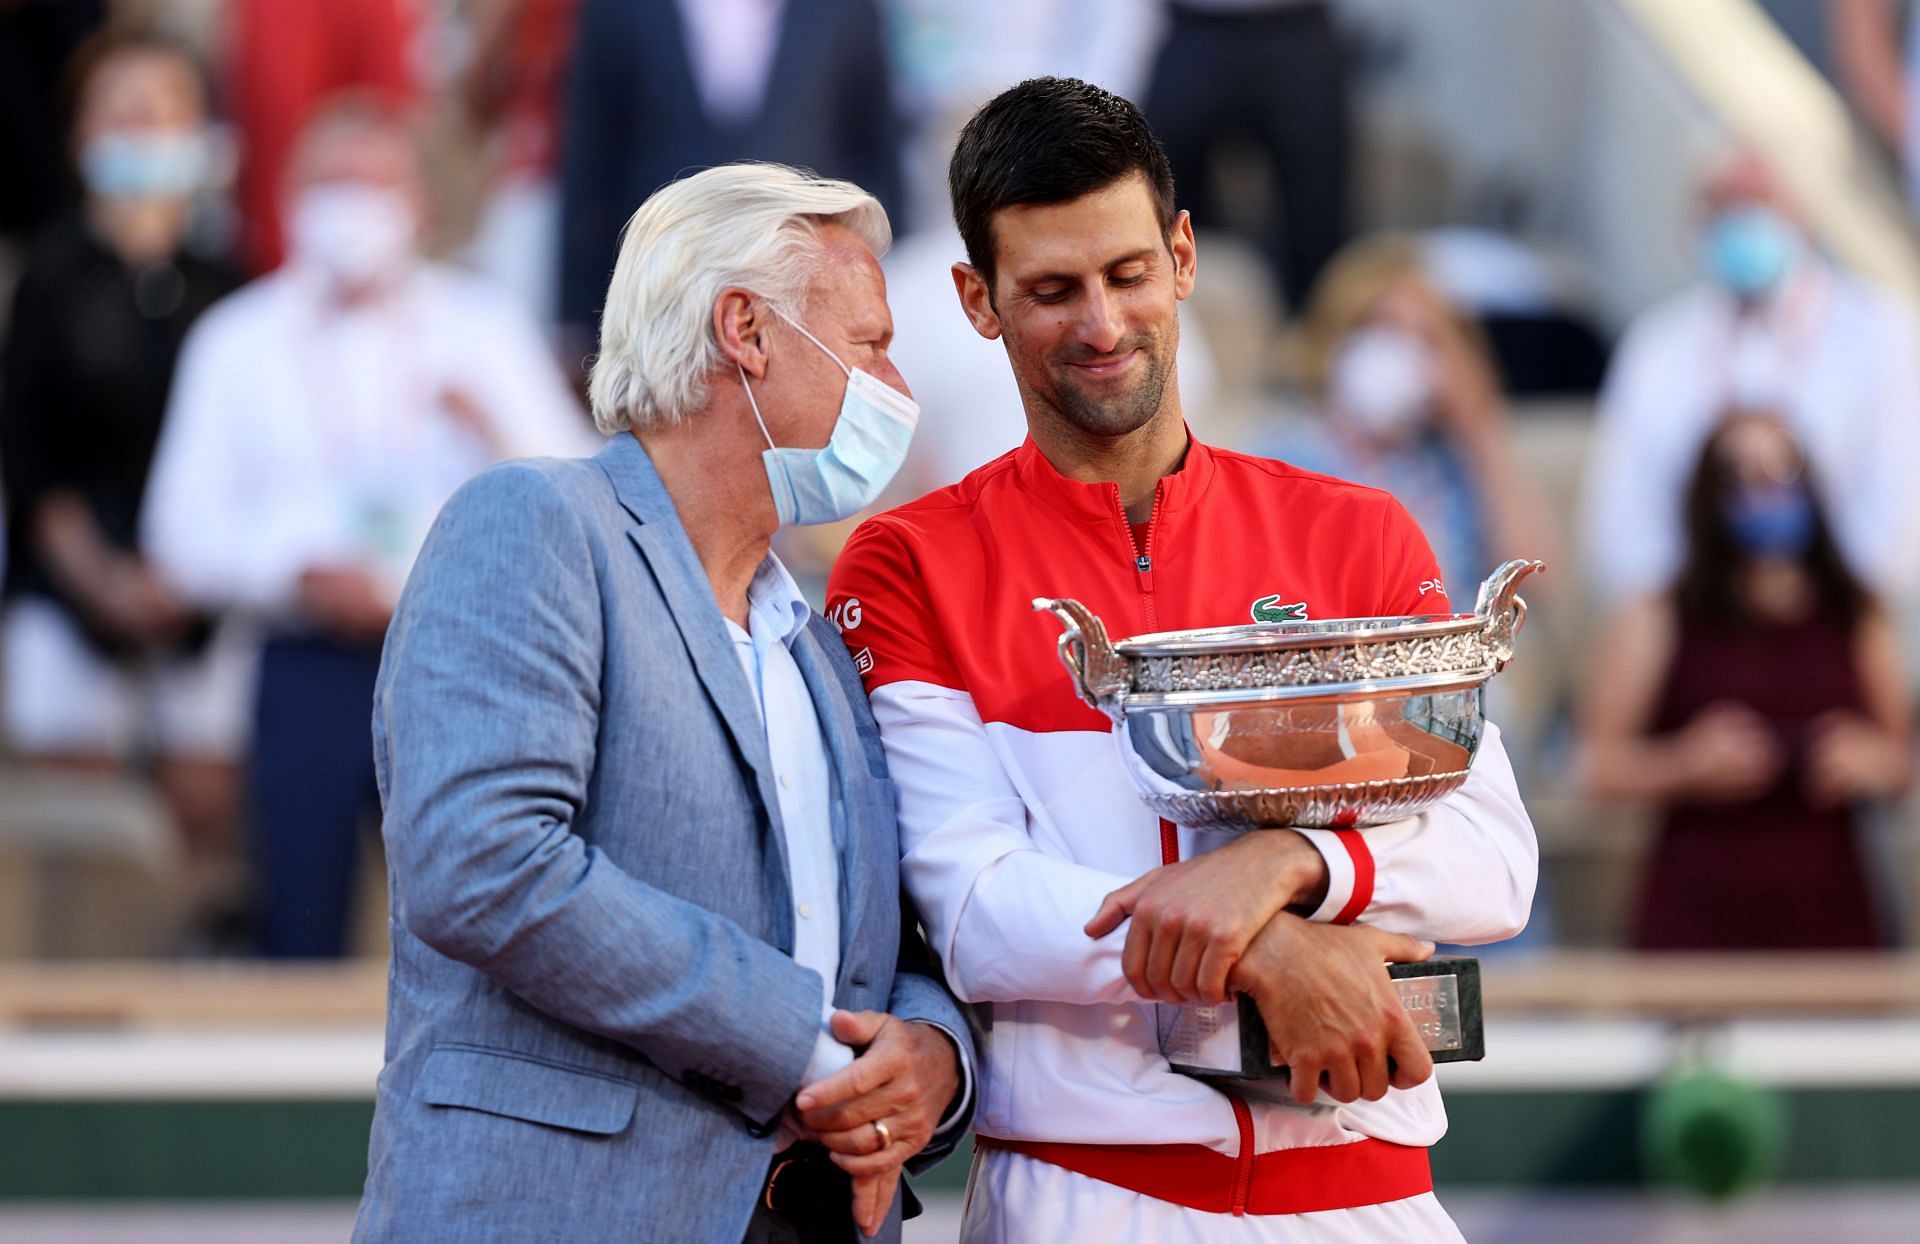 2021 French Open - Day Fifteen